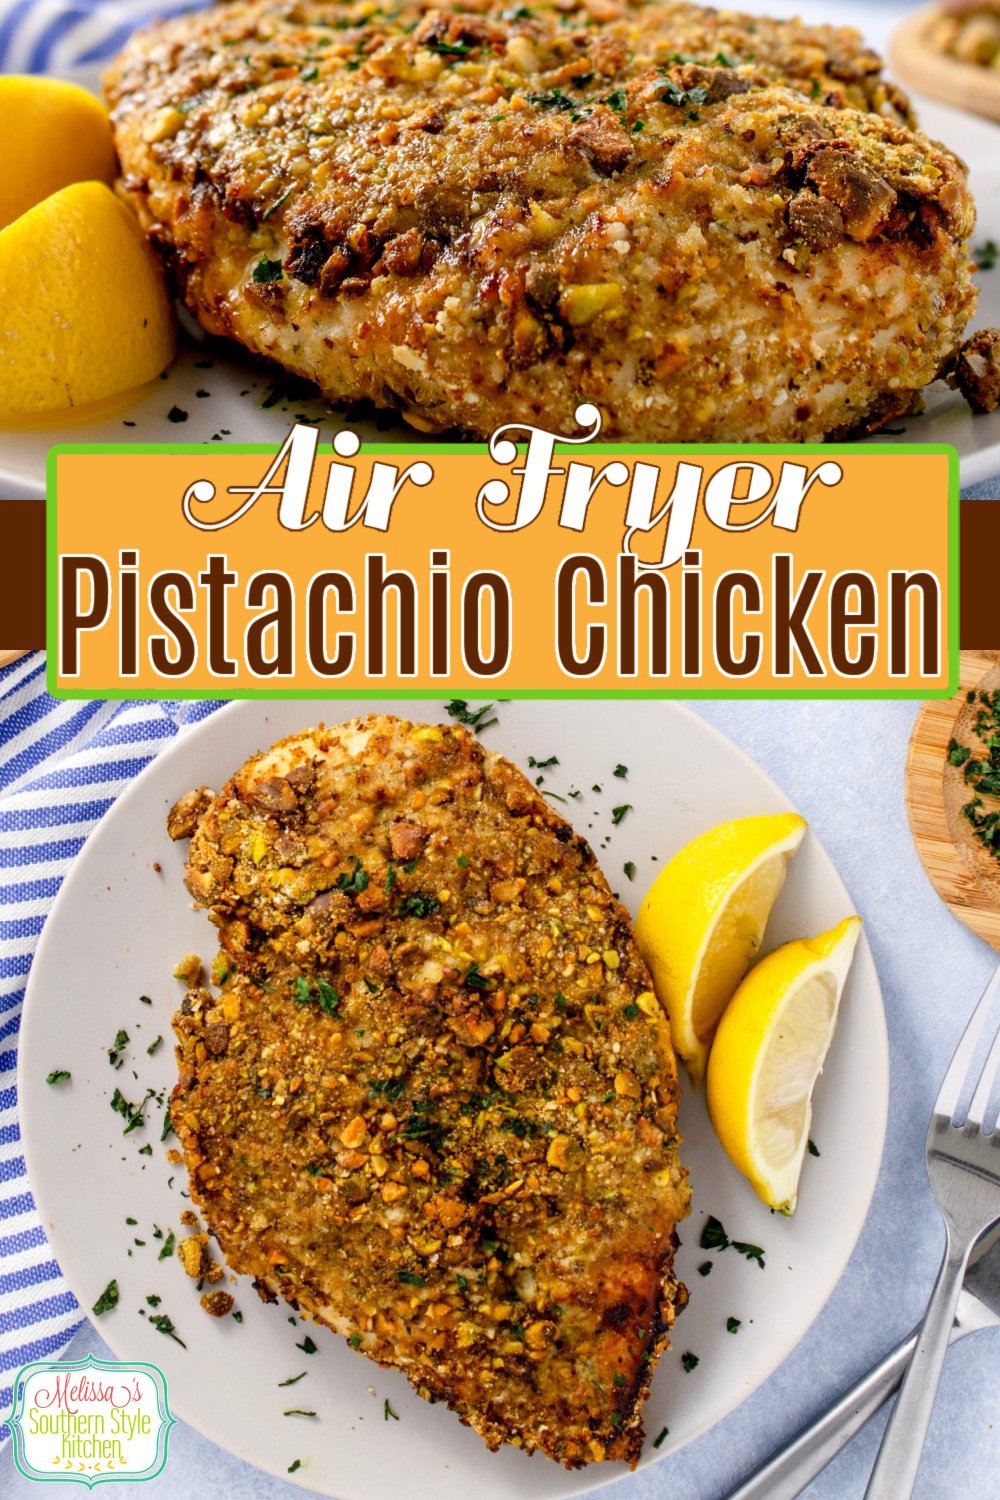 Make this Pistachio Crusted Chicken in an Air Fryer or the Oven #pistachiochicken #easychickenrecipes #chickenbreastrecipes #chickenthighs #airfryerrecipes #easyrecipes #pistachios #friedchickenrecipes via @melissasssk